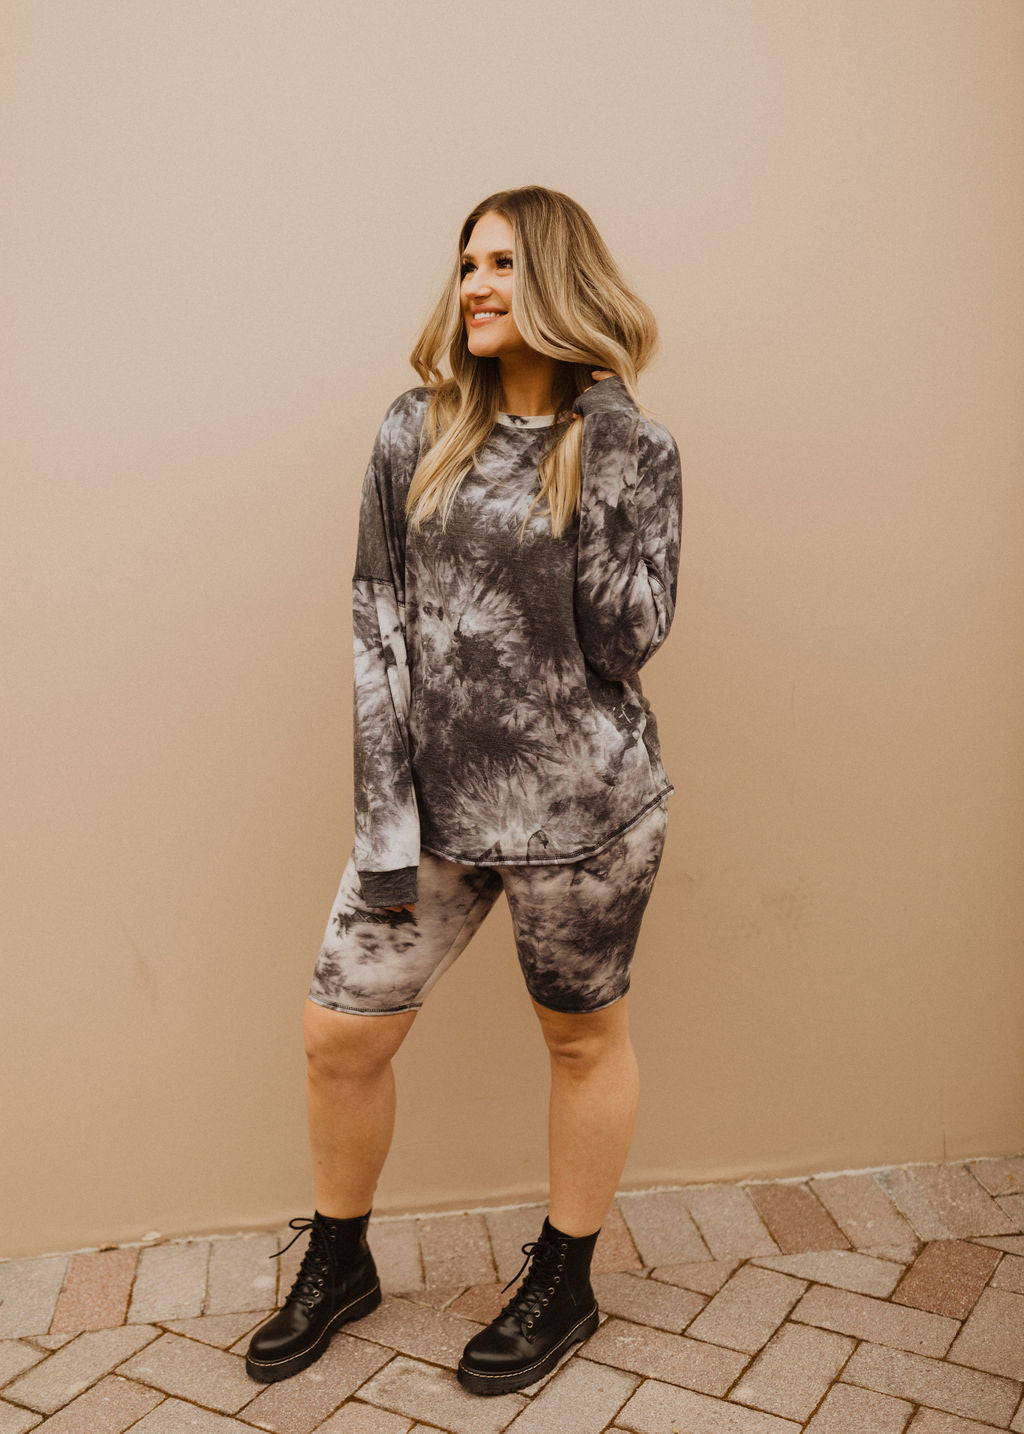 THE ADDICTED TO COMFORT TIE DYE SET IN CHARCOAL